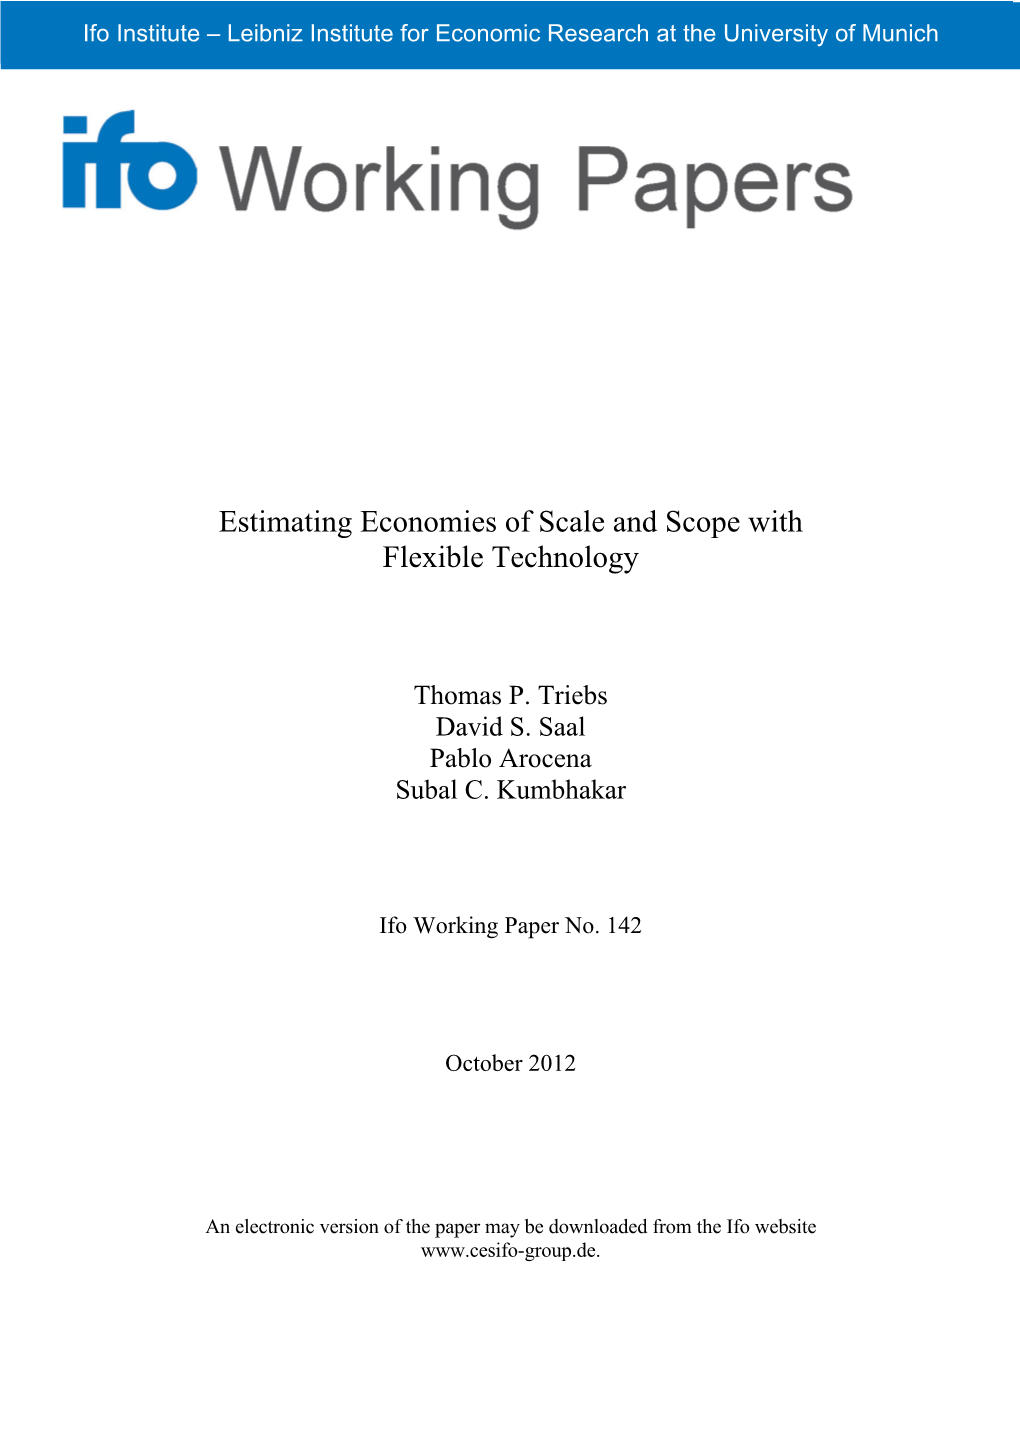 Estimating Economies of Scale and Scope with Flexible Technology